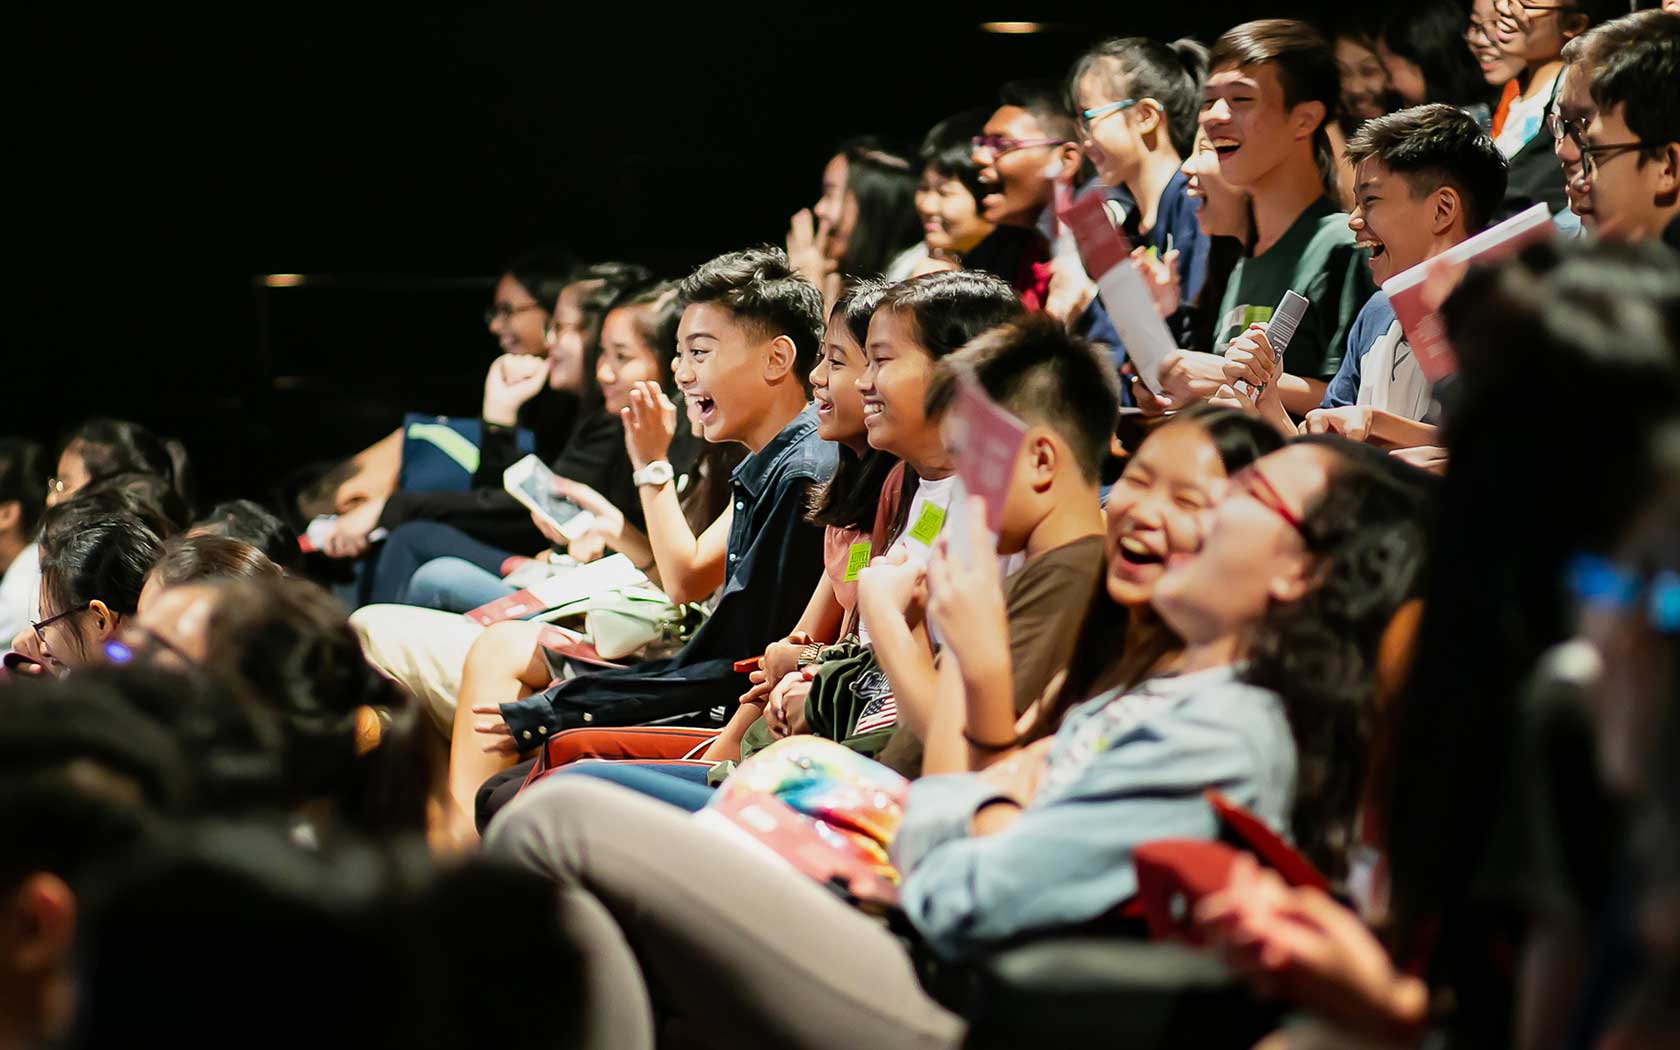 Image depicting students in the audience enjoying a performance at Esplanade.